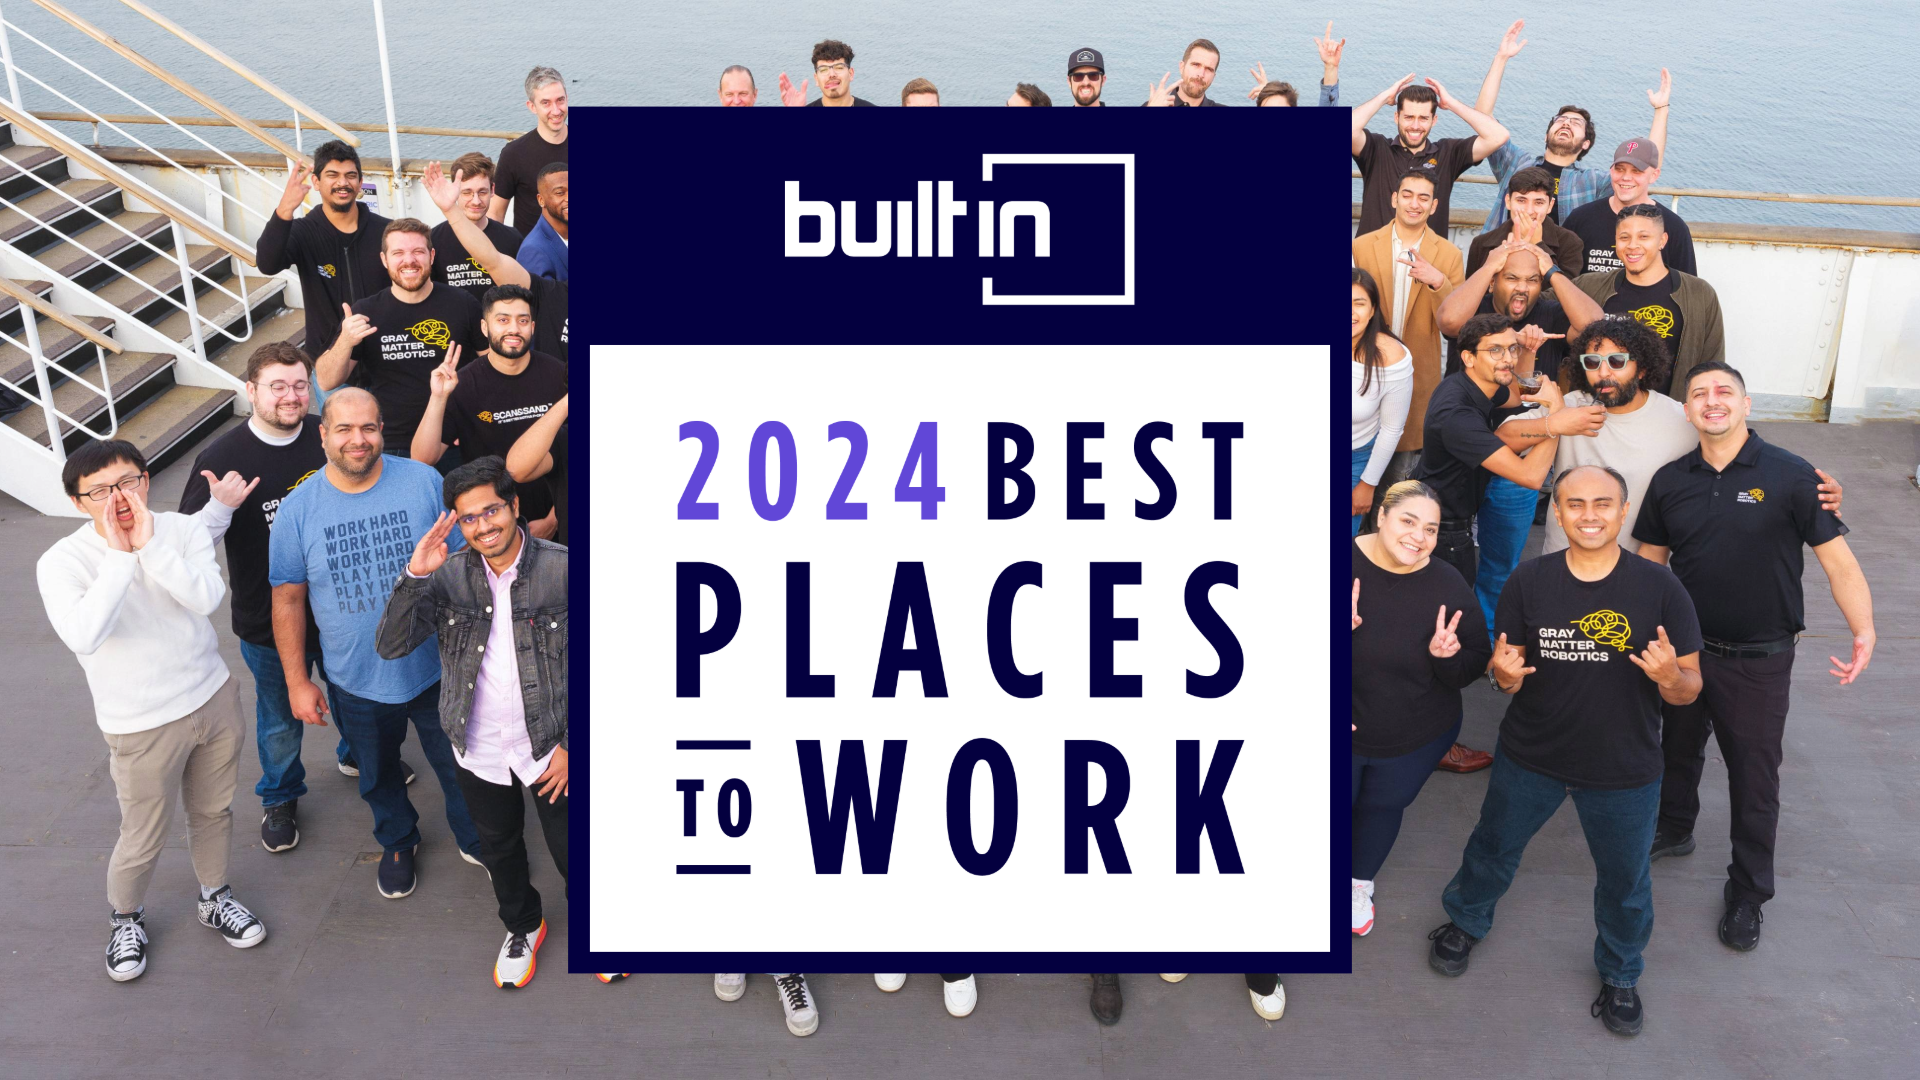 Best Places to Work 2024